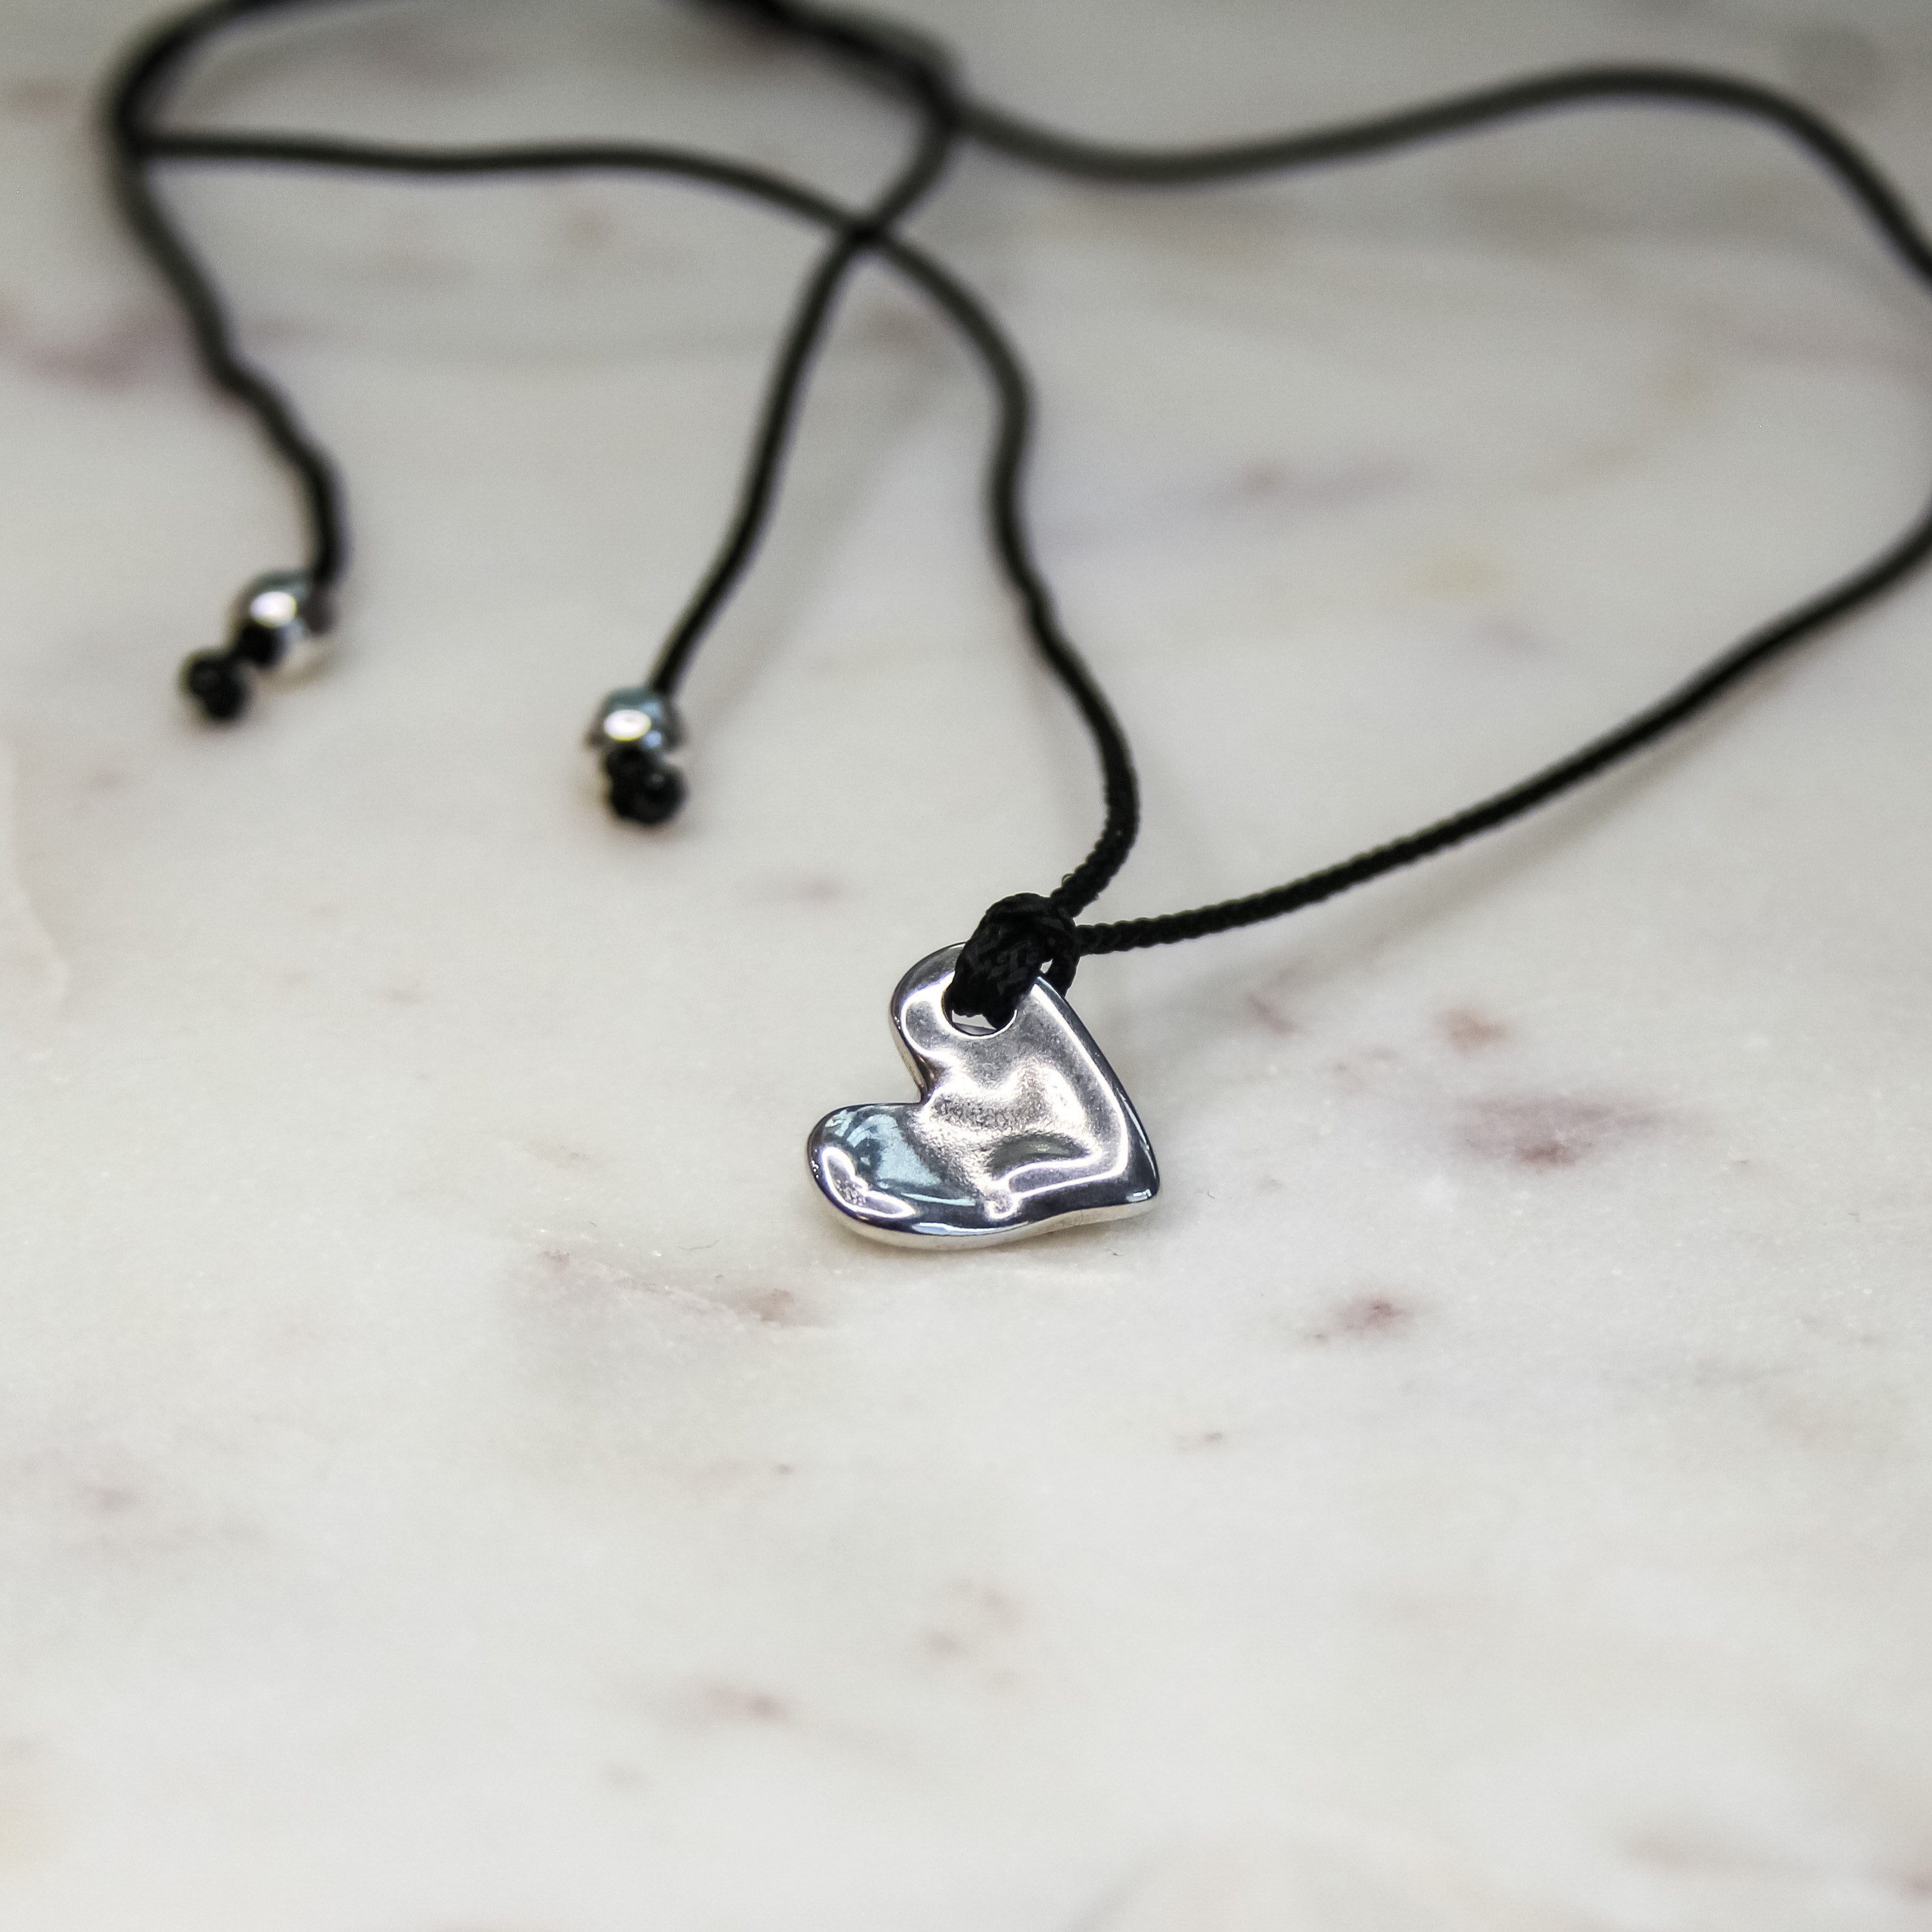 Free Love Necklace